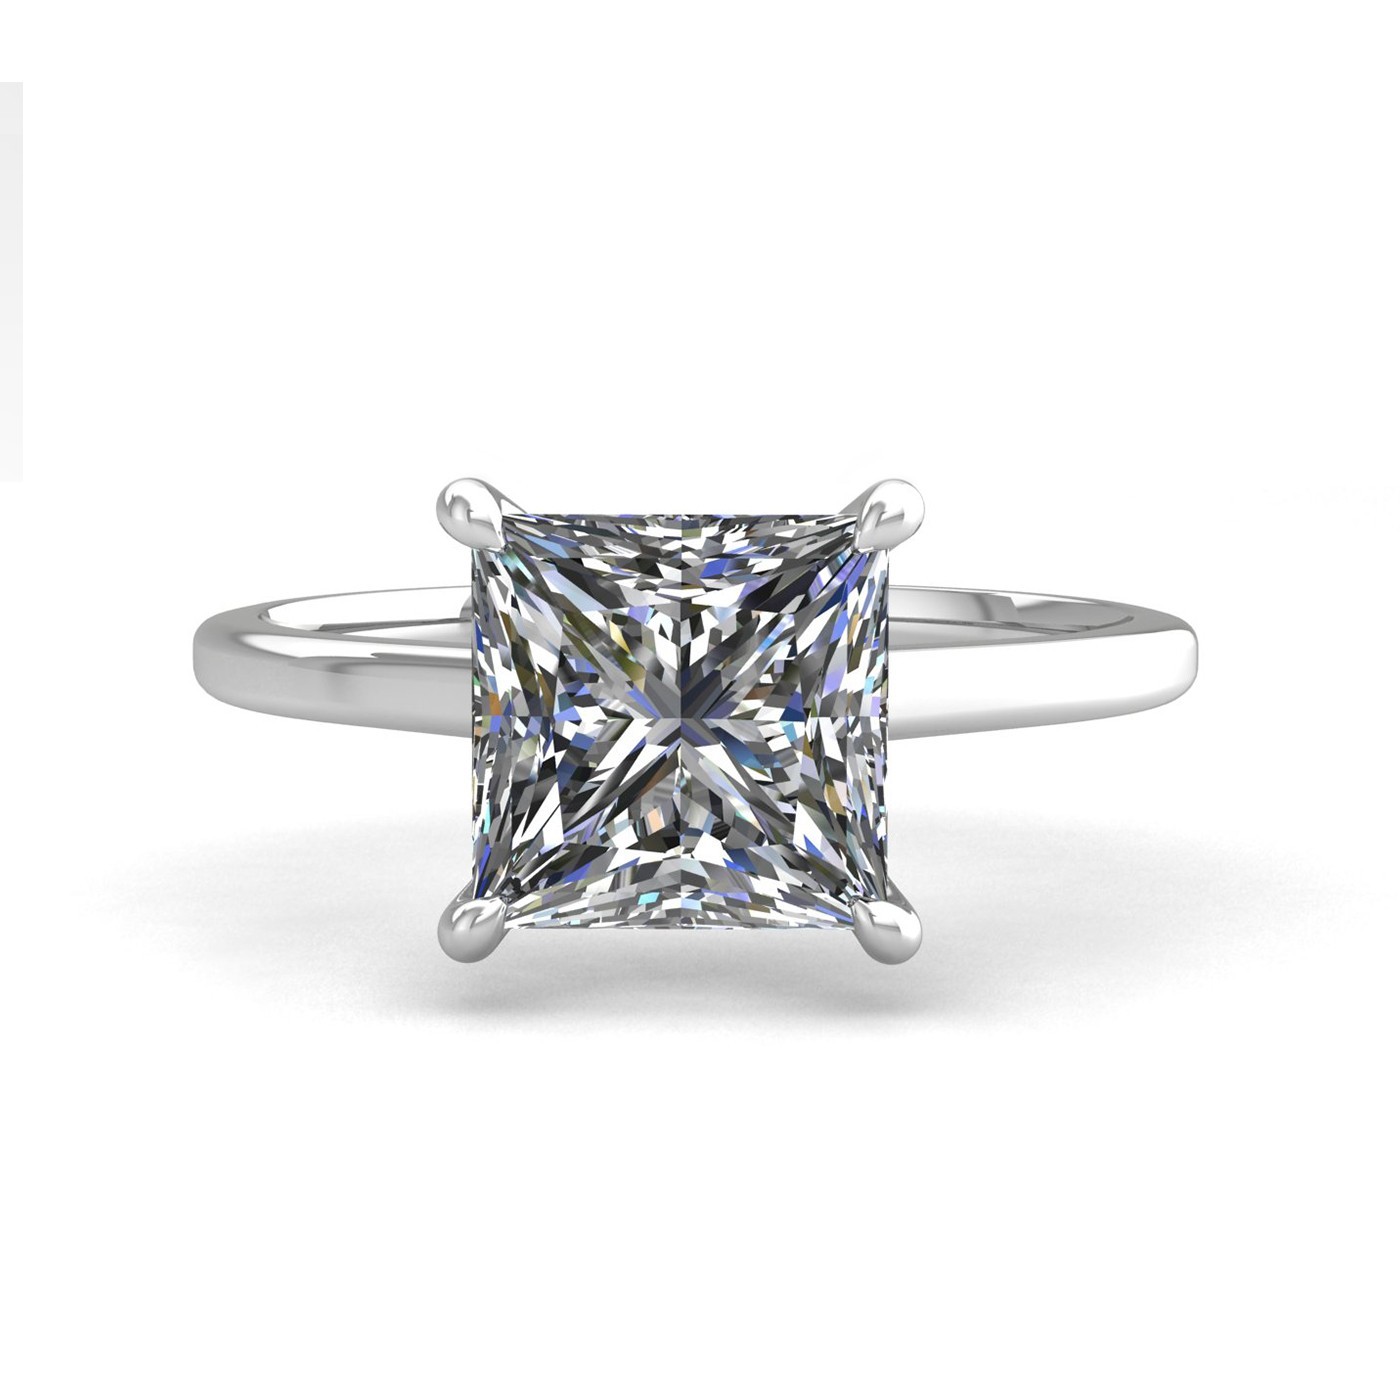 18k white gold  2,50 ct 4 prongs solitaire princess cut diamond engagement ring with whisper thin band Photos & images